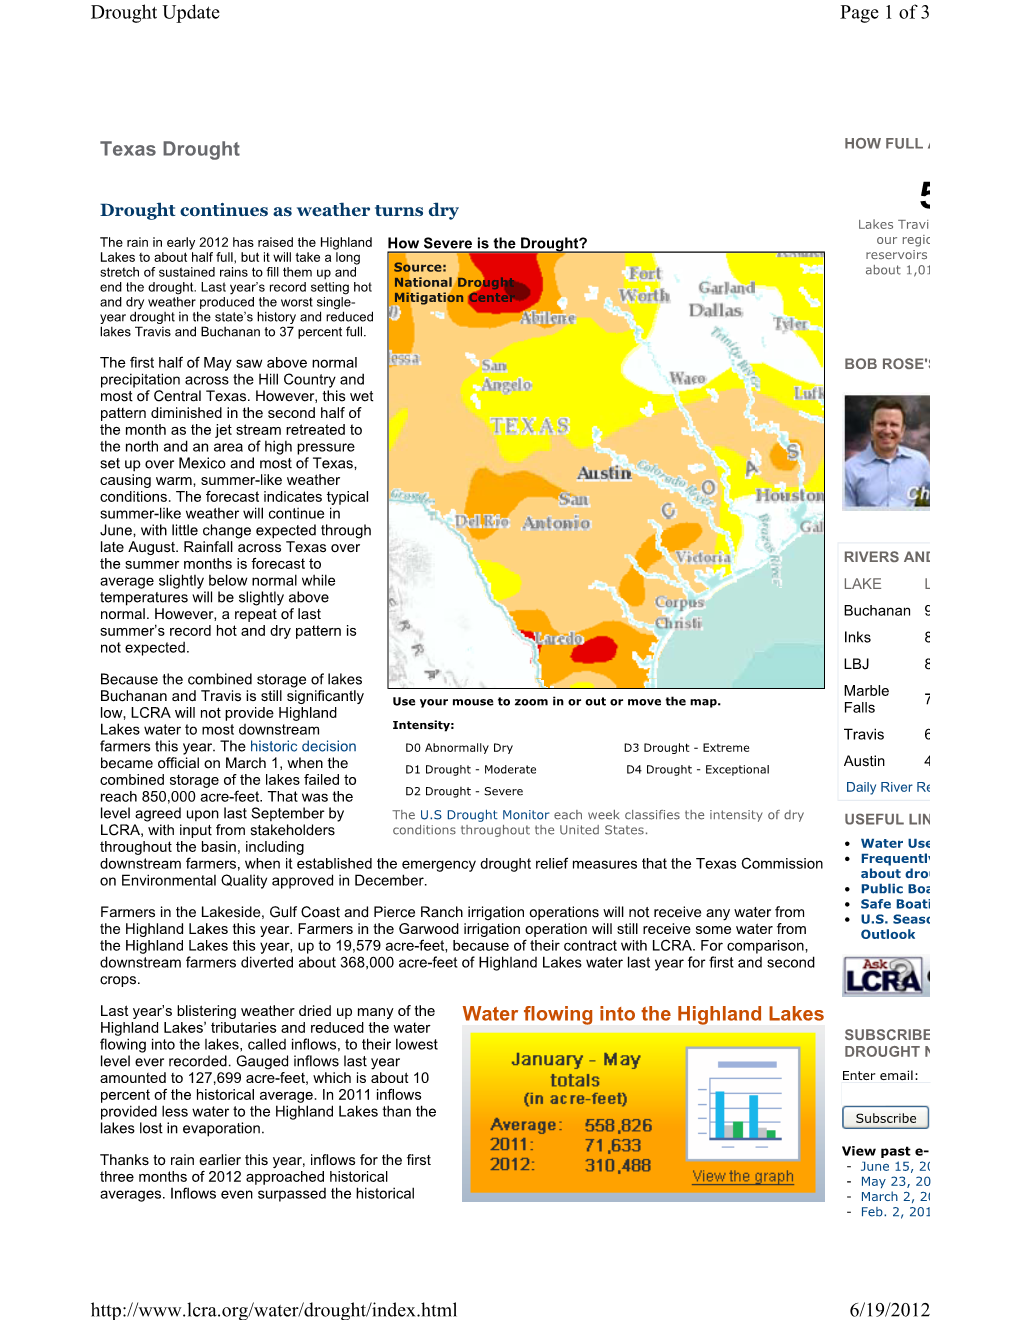 Water Flowing Into the Highland Lakes Texas Drought Page 1 of 3 Drought Update 6/19/2012